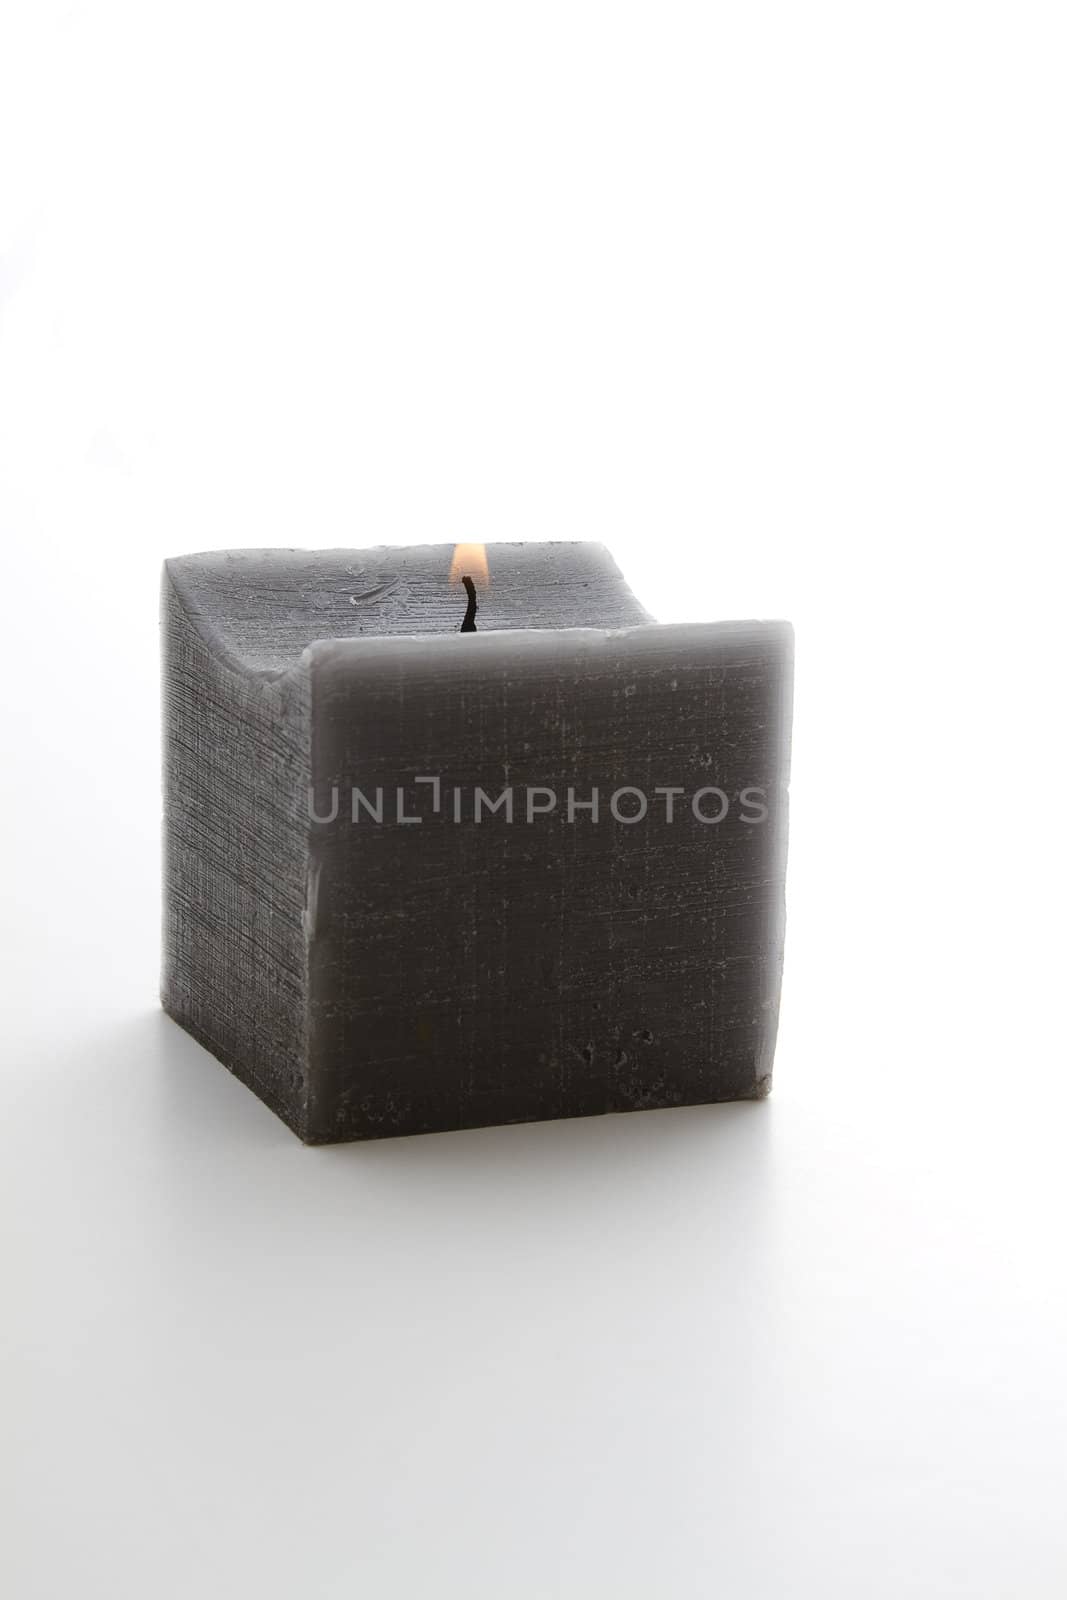 lit square gray candle against white background